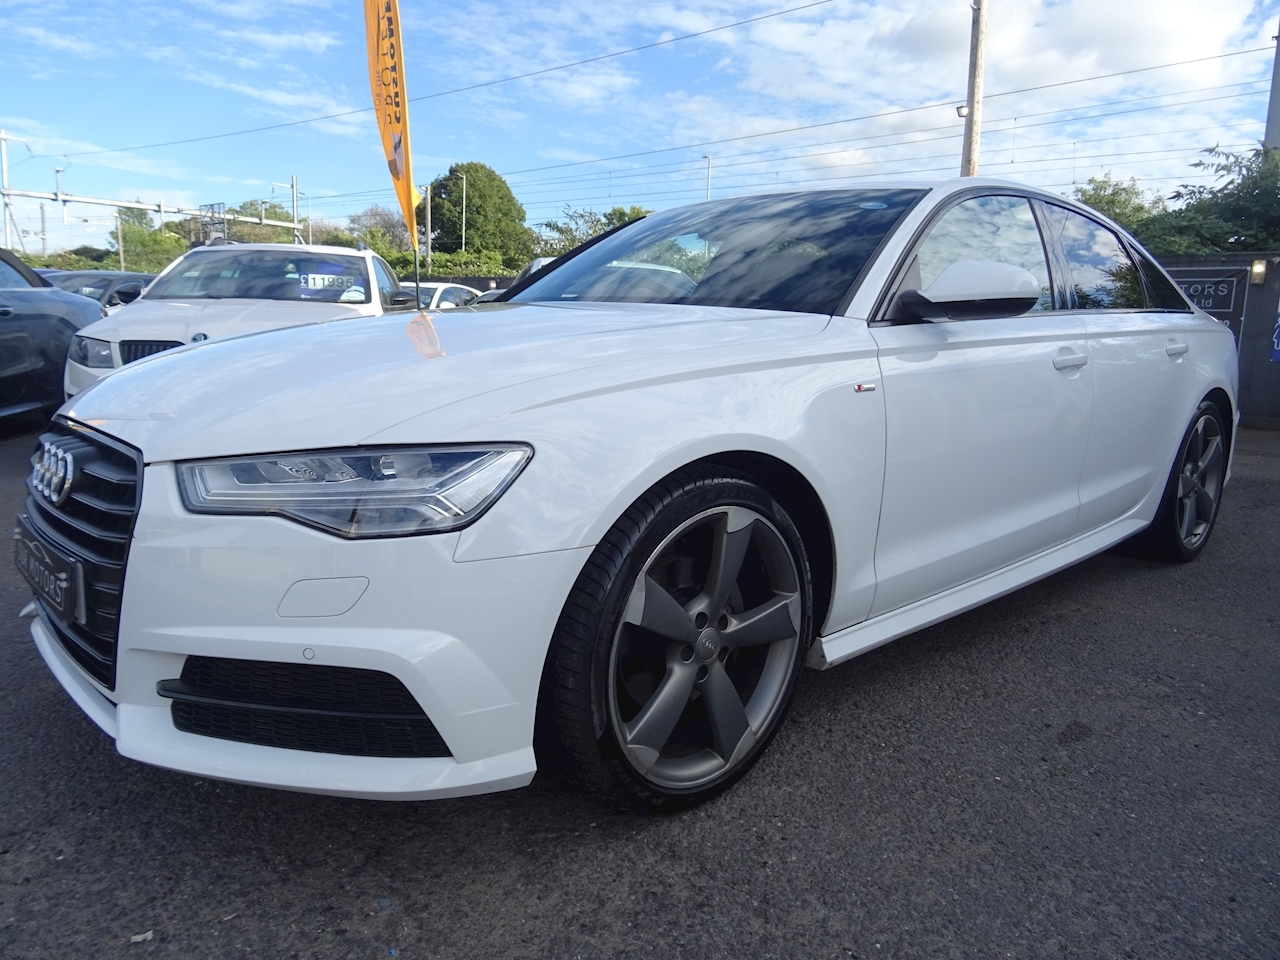 A6 Saloon 2.0 TDI ultra Black Edition Saloon 4dr Diesel S Tronic (s/s) (190 ps)